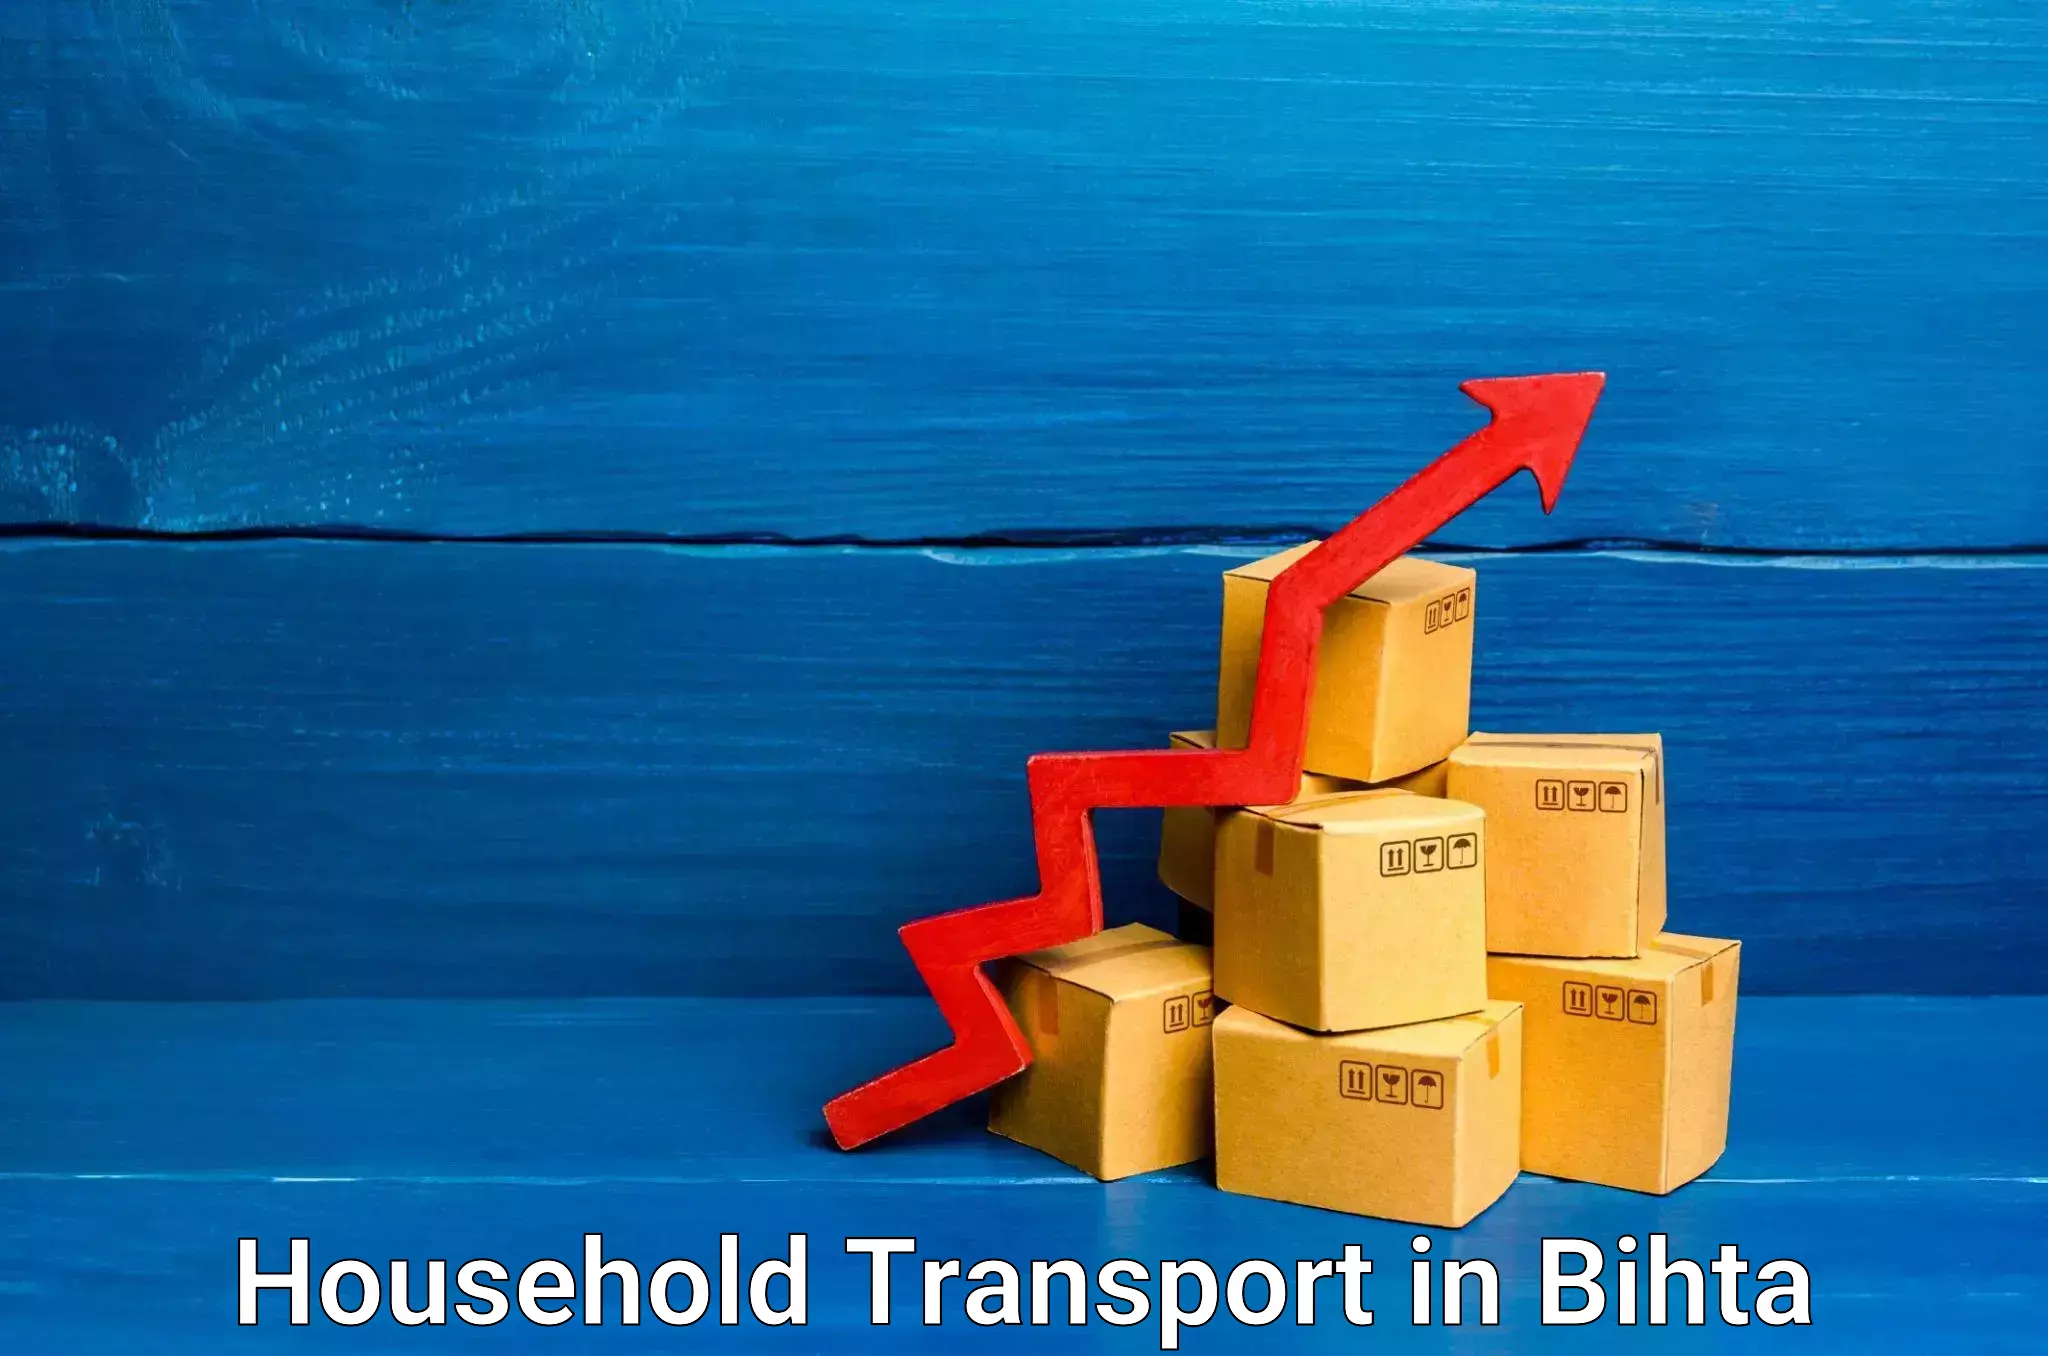 Quality household transport in Bihta